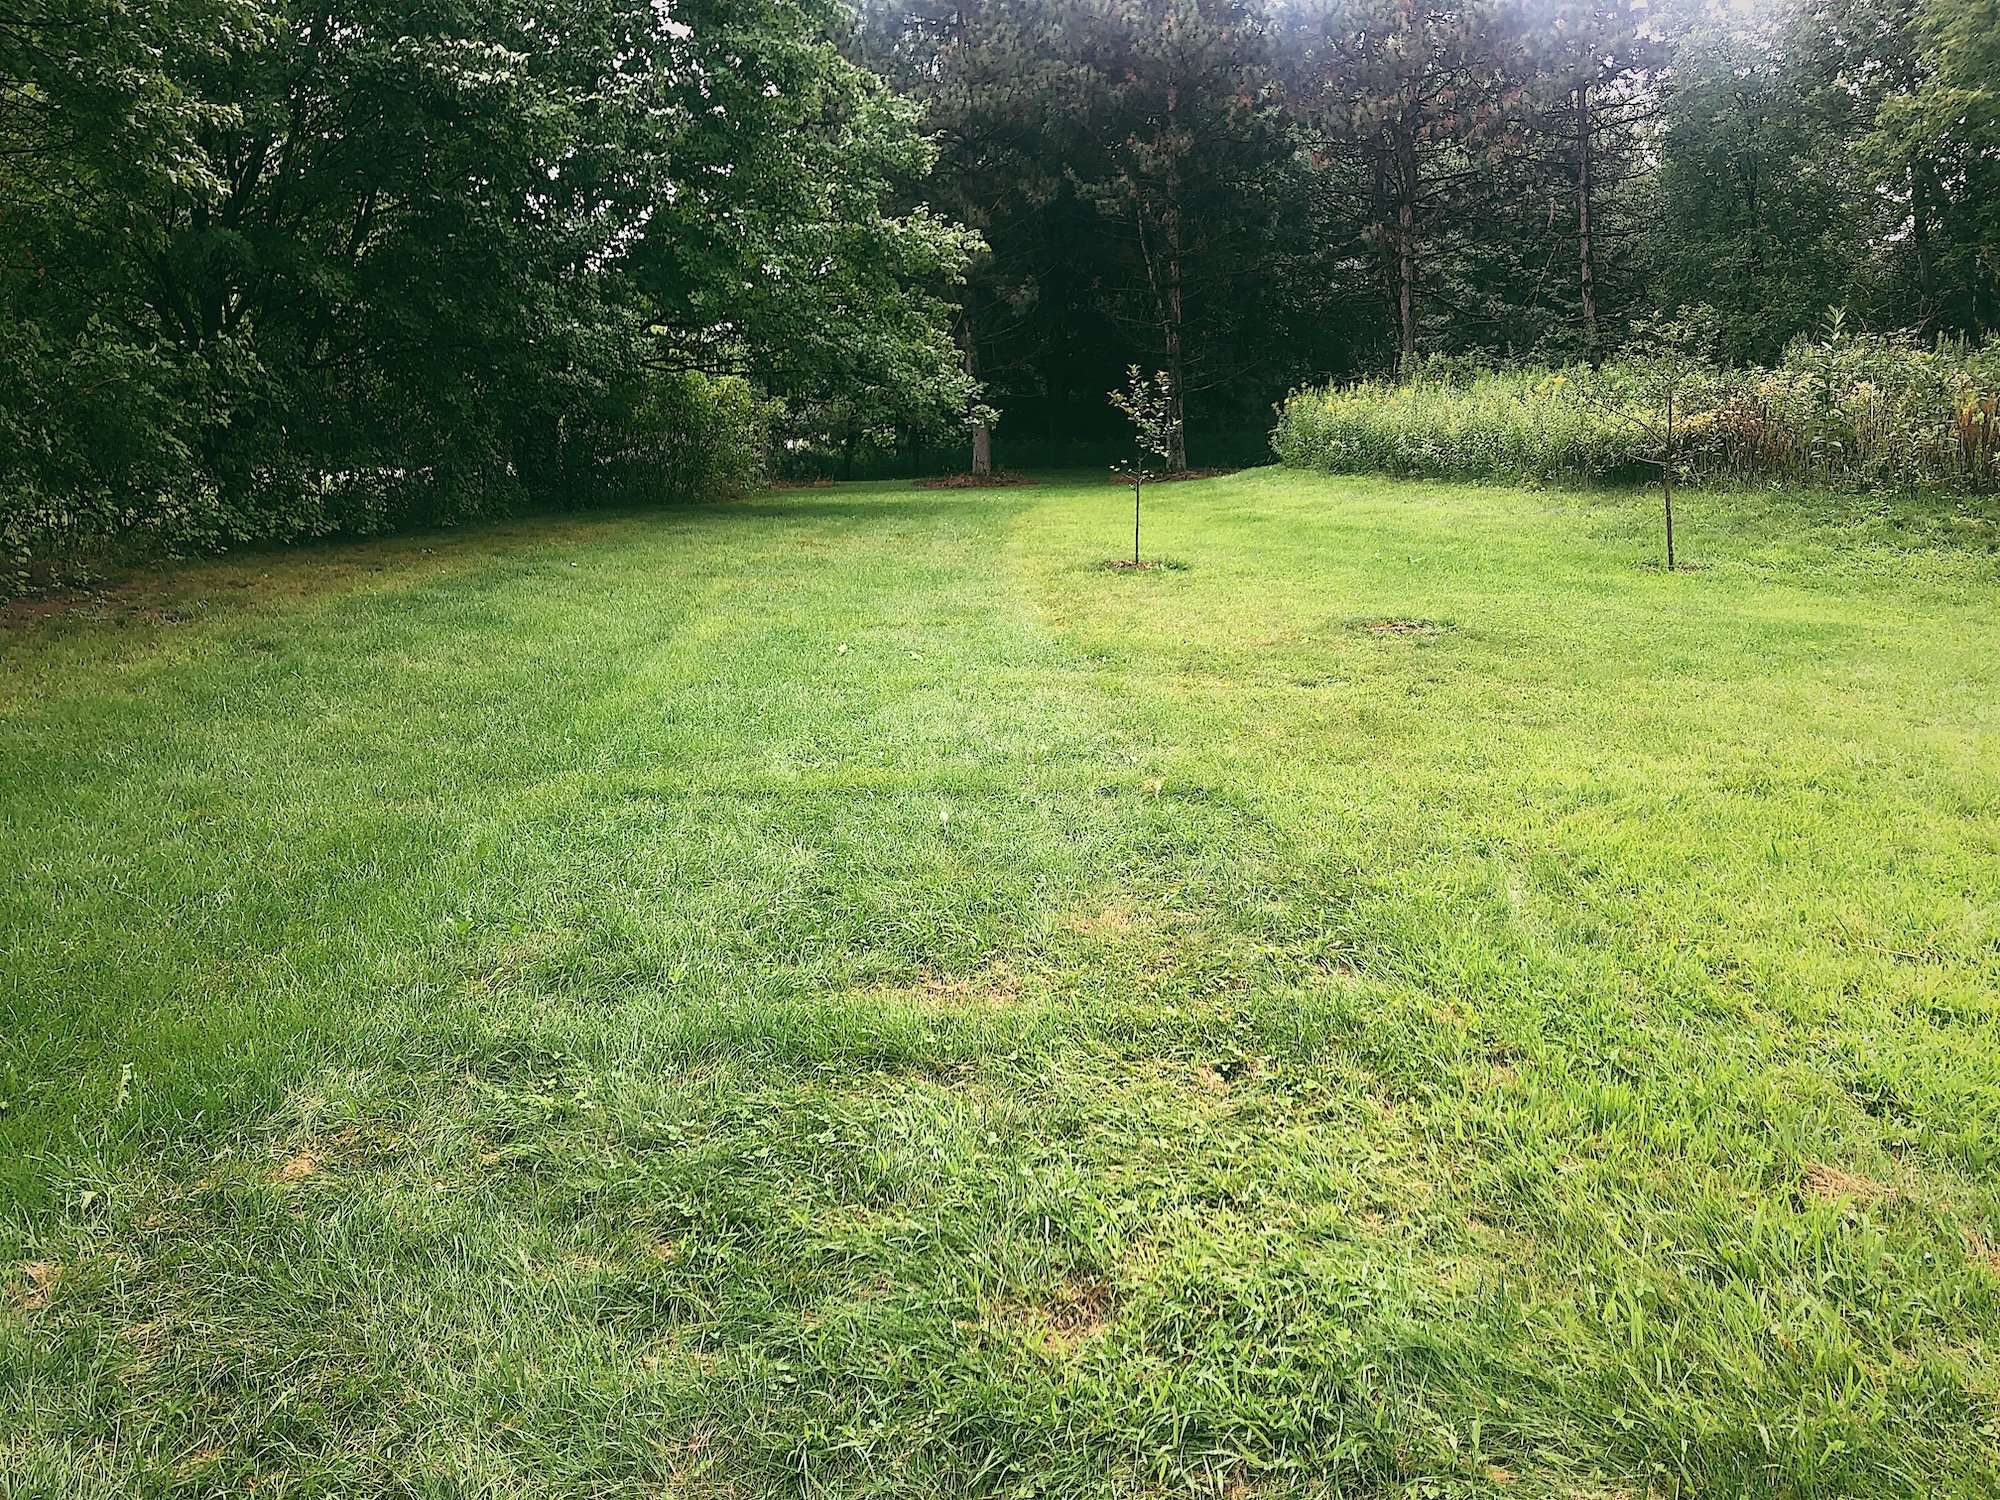 Comparison of green grass on the left and yellow grass on the right